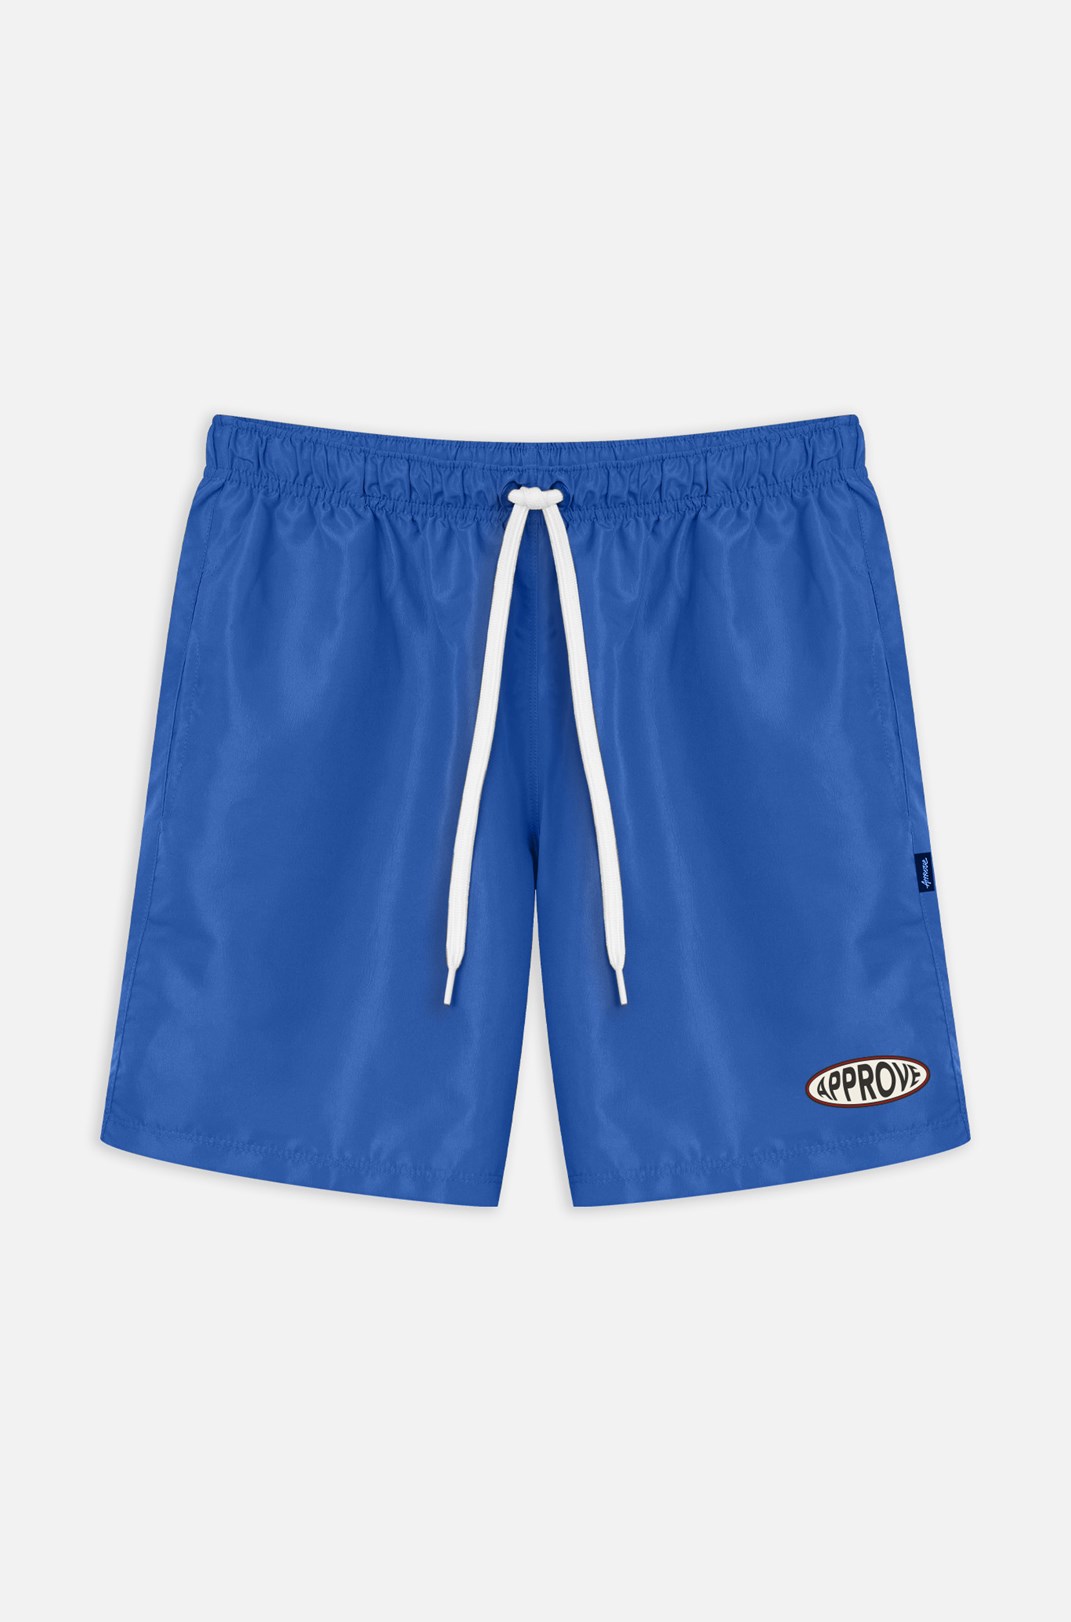 Shorts 7inches Approve Workwear Azul